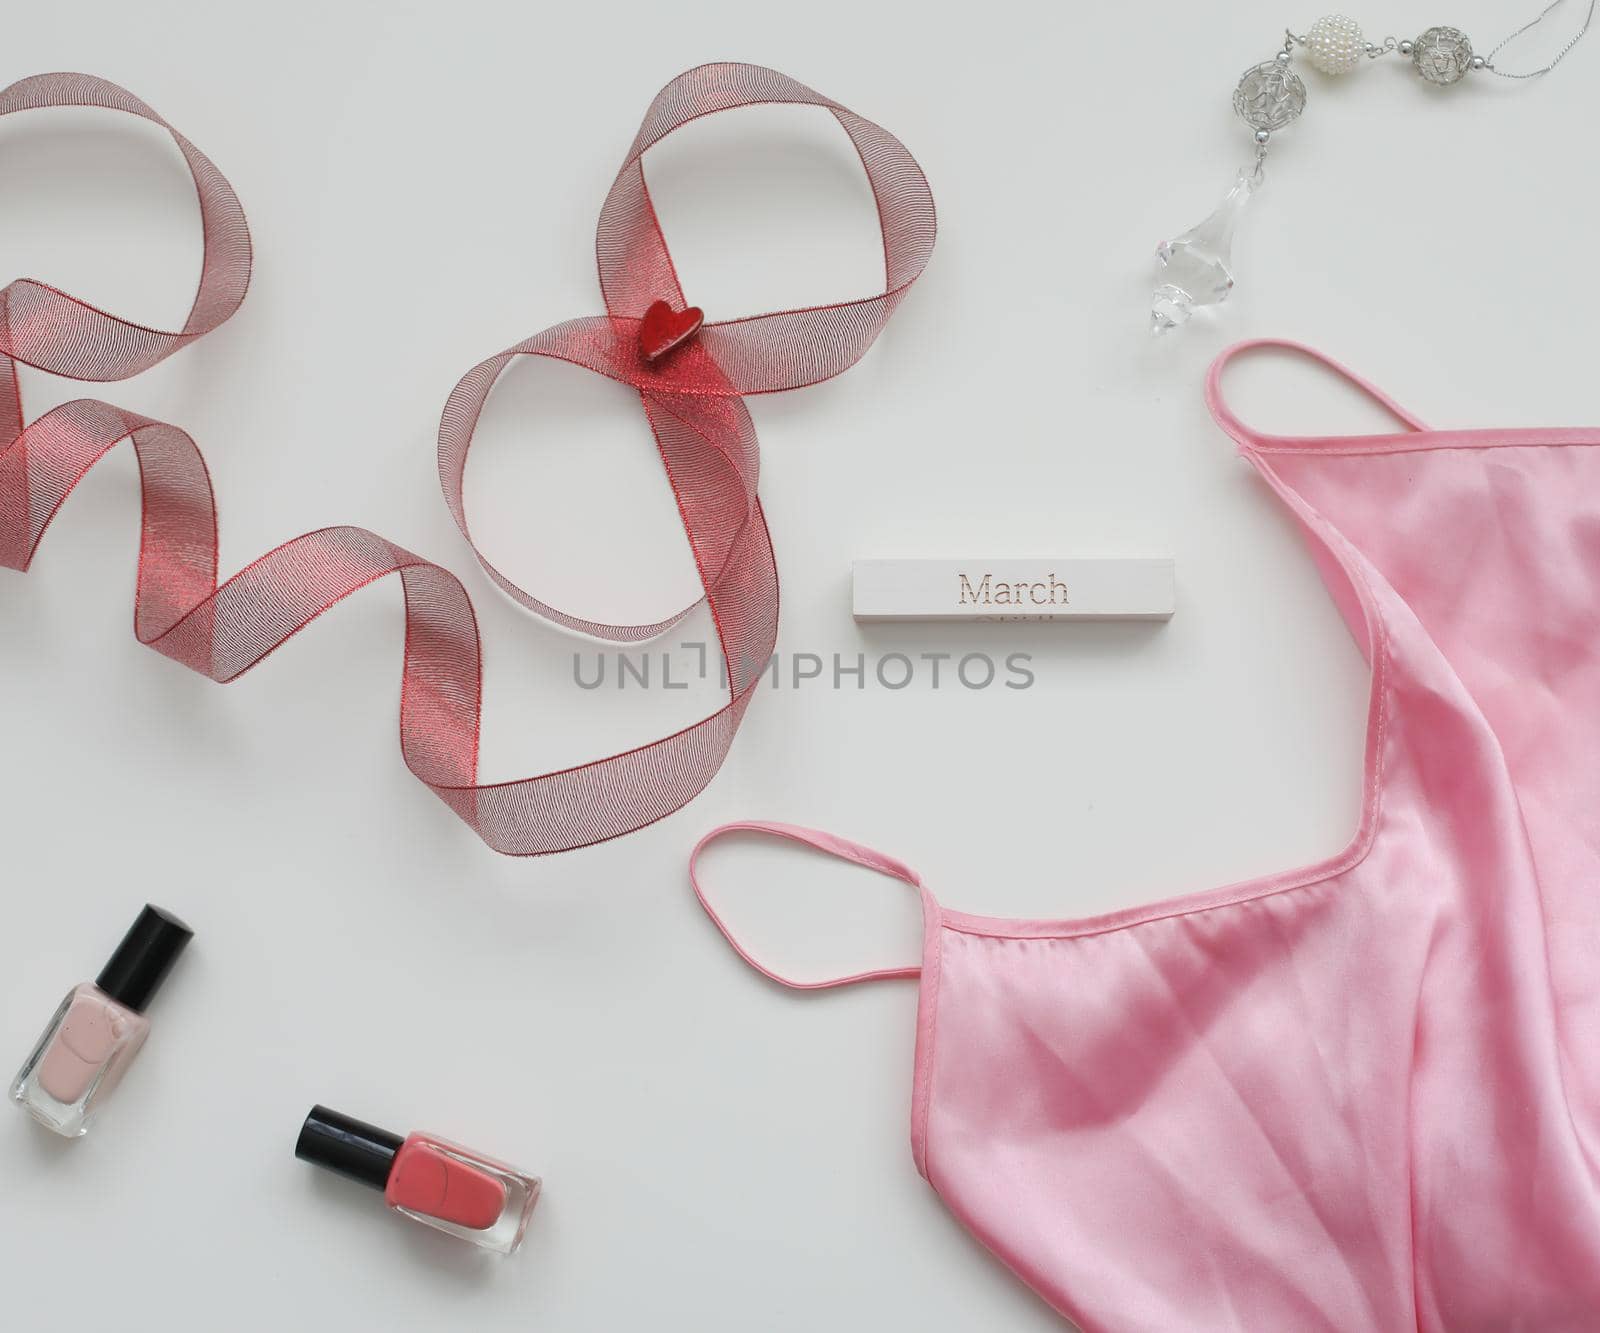 Concept Women's Day, March 8. Female underwear with a red ribbon and cosmetics on white background. Styled flat lay, top view, copy space.  by paralisart